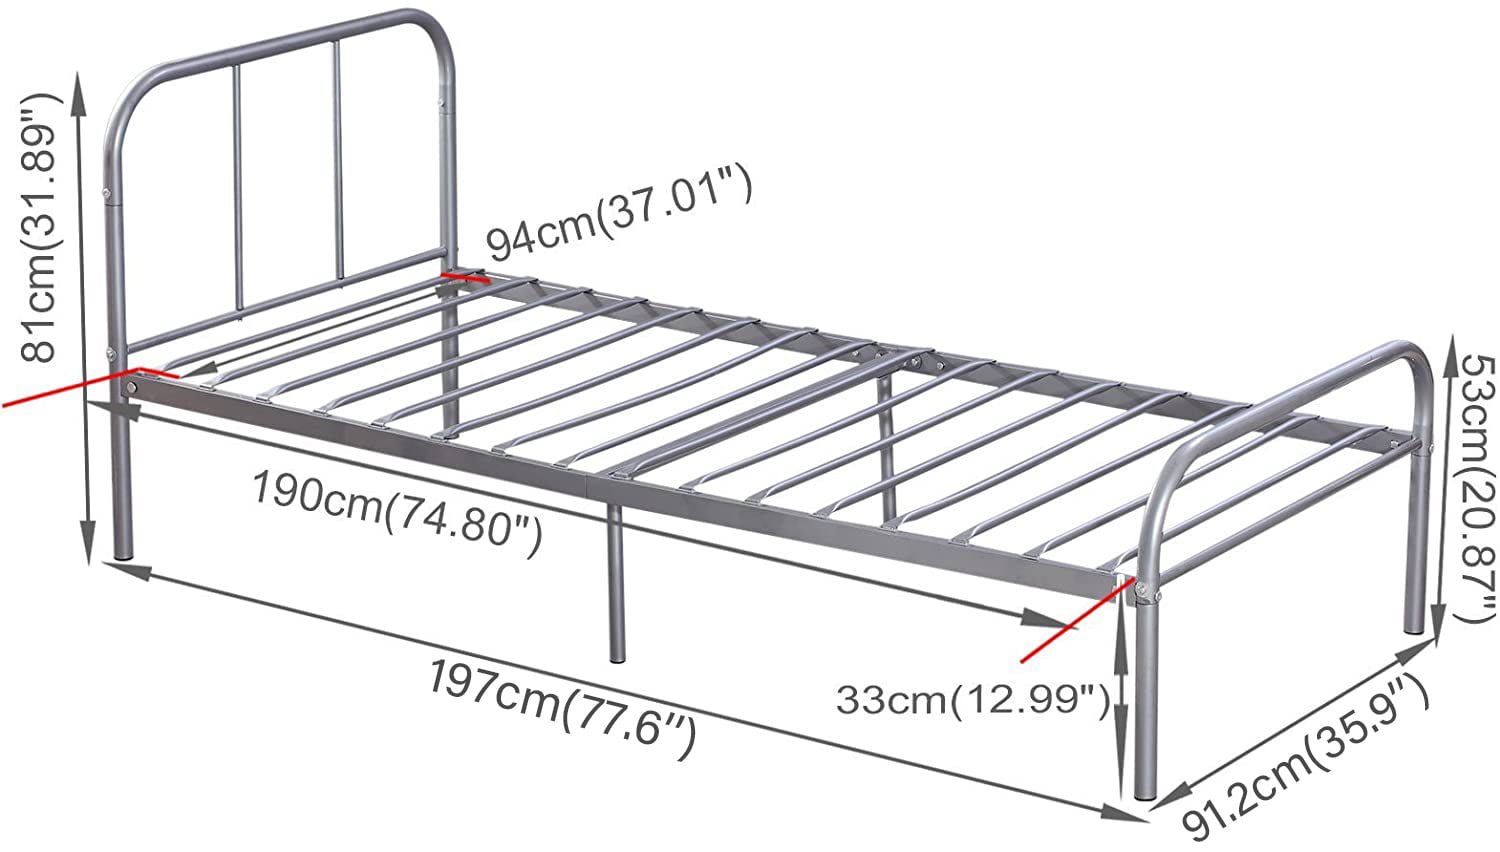 Voilamart Twin Metal Bed Frames with Headboard and Footboard, Single 6 Legs Bed Frame Platform Mattress Foundation for Kids Adult, Silver